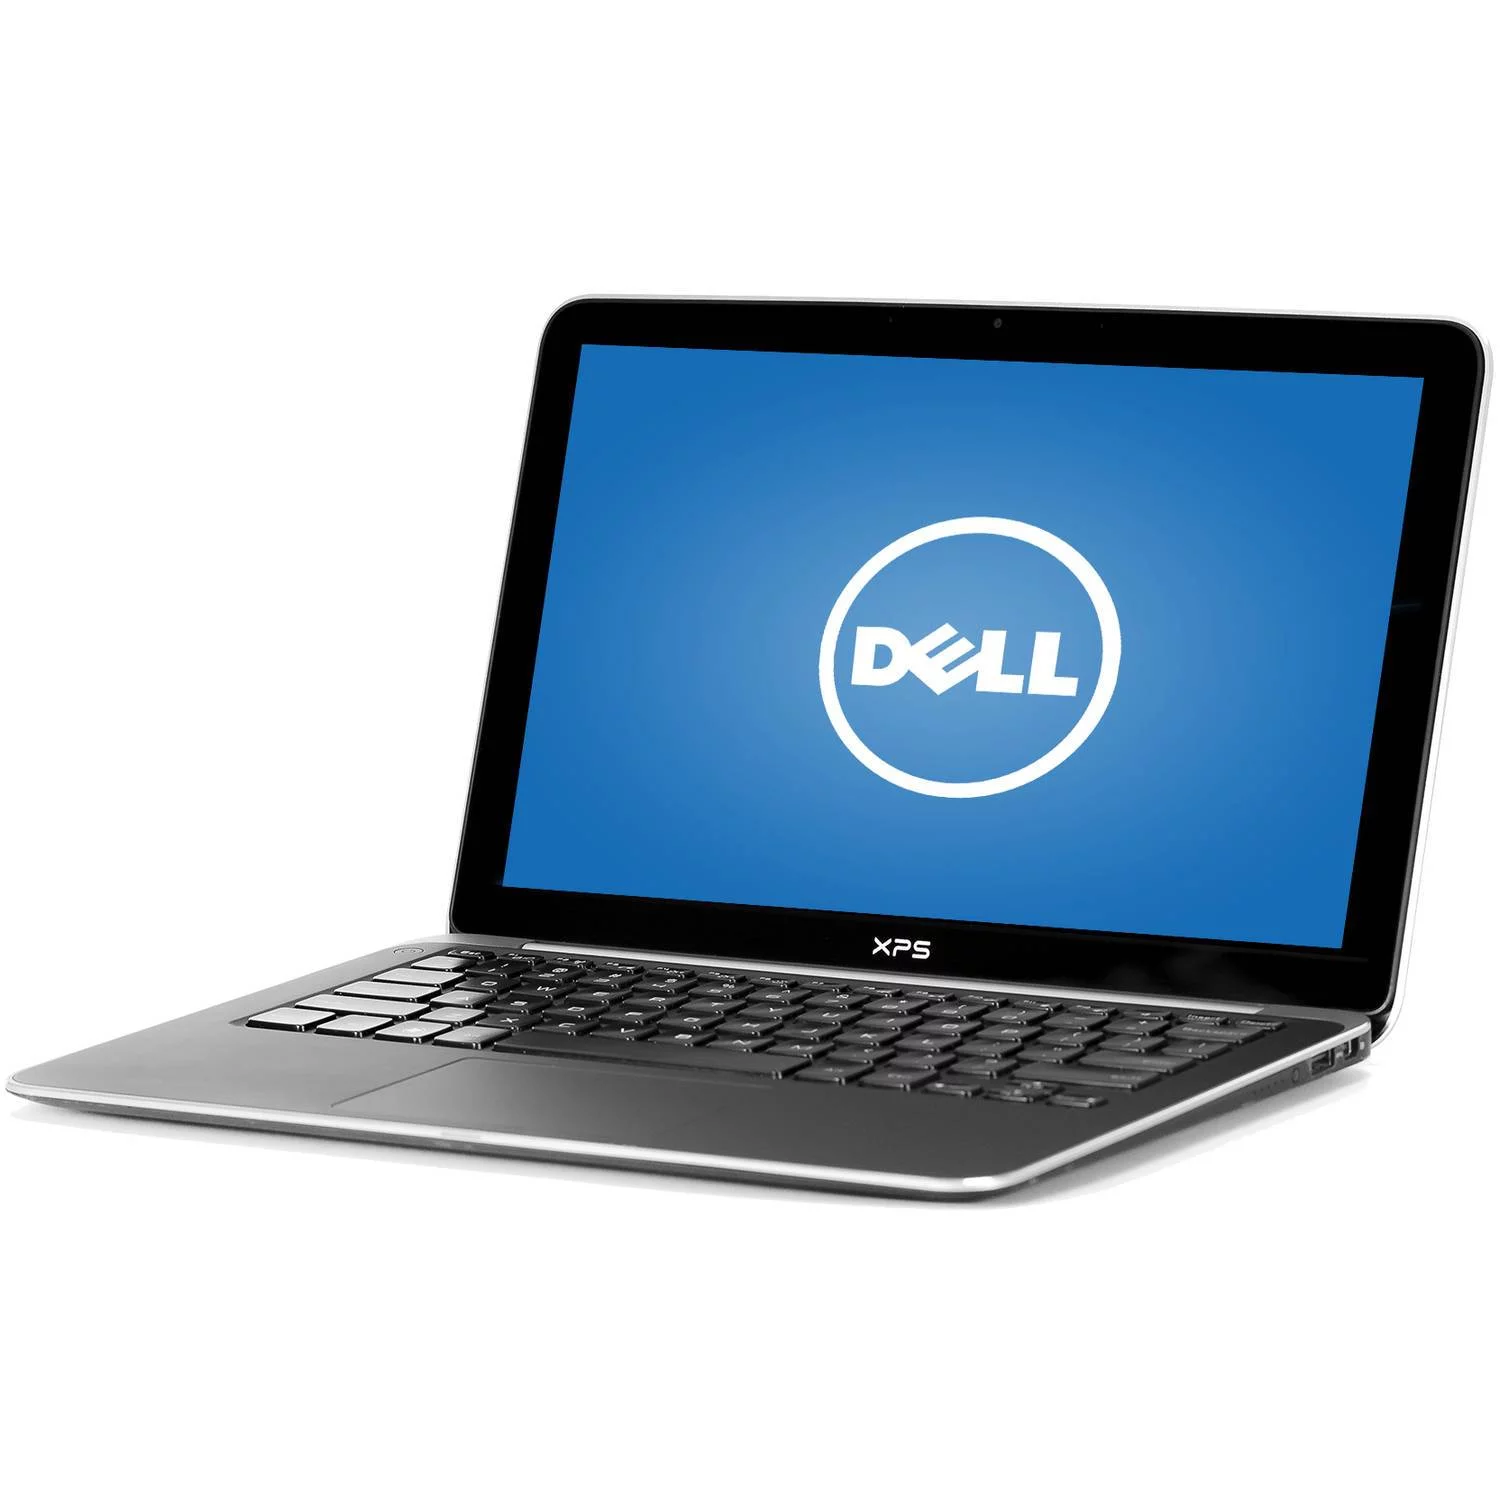 Dell XPS L322X Notebook